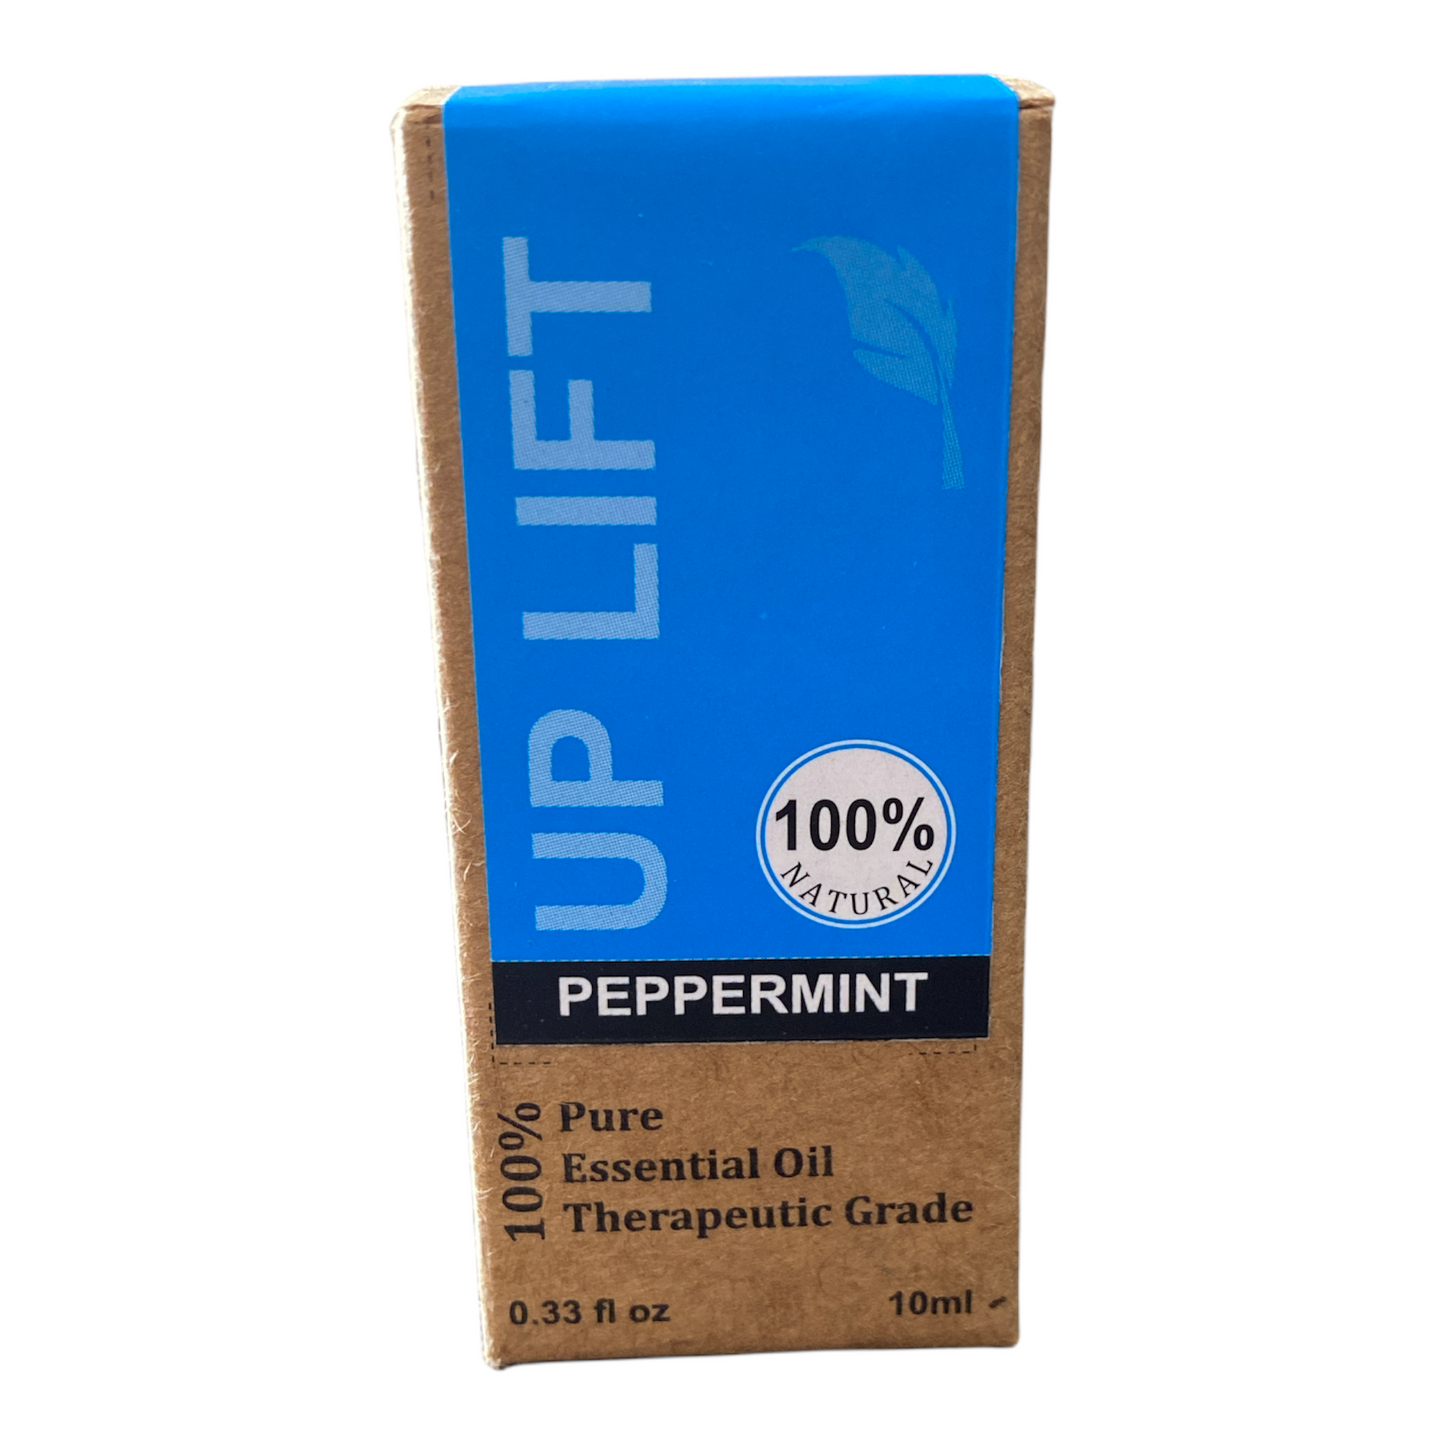 Uplift - Peppermint Essential Oil